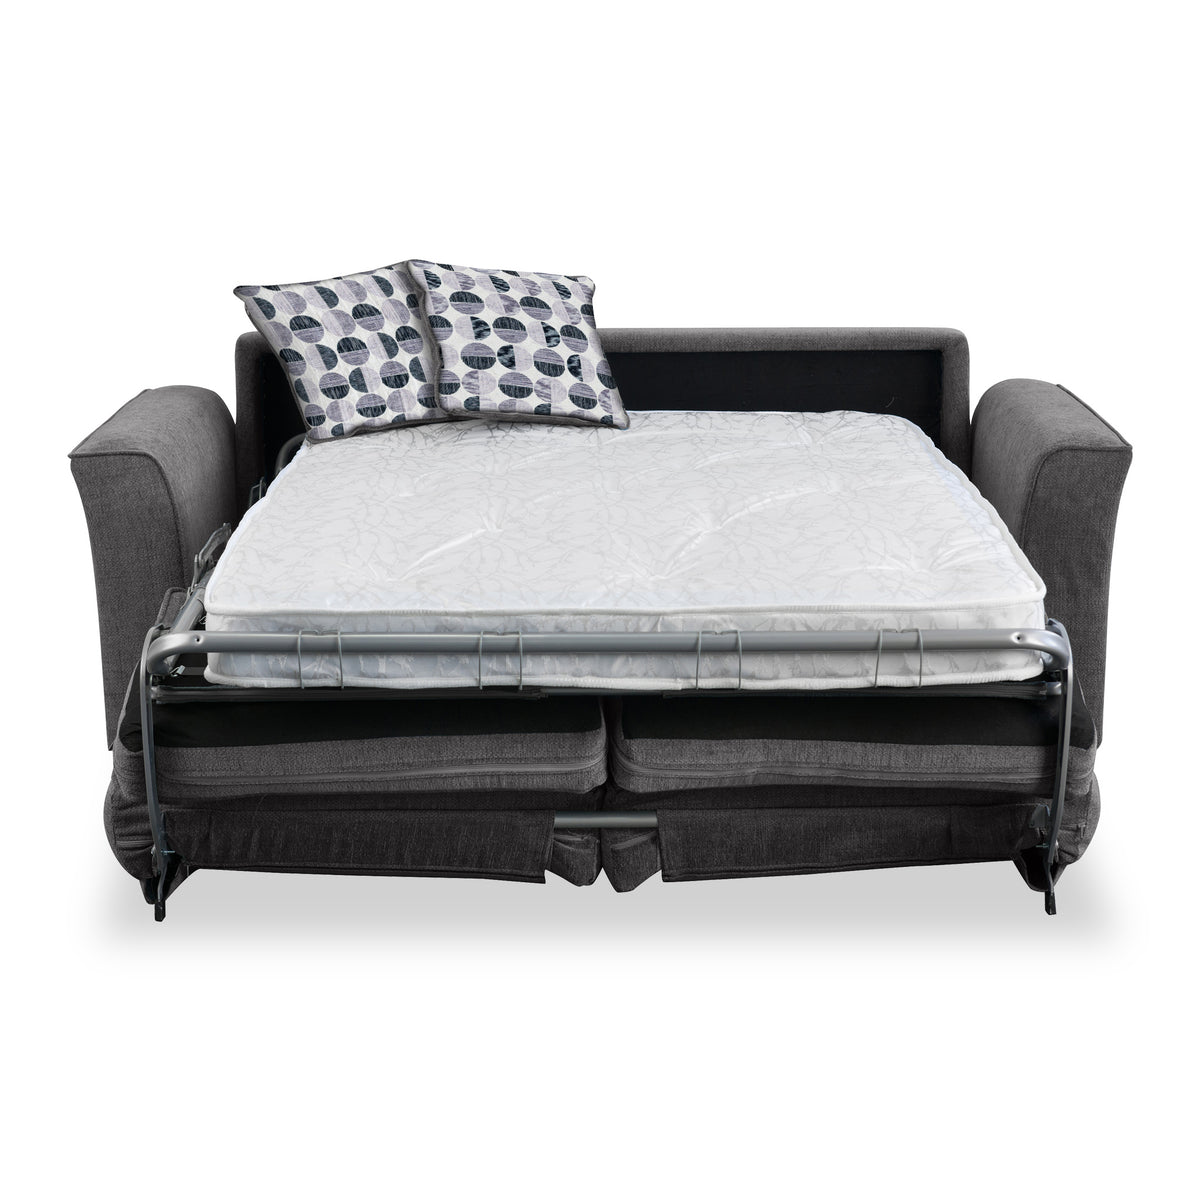 Boston 2 Seater Sofabed in Charcoal with Rufus Mono Cushions by Roseland Furniture